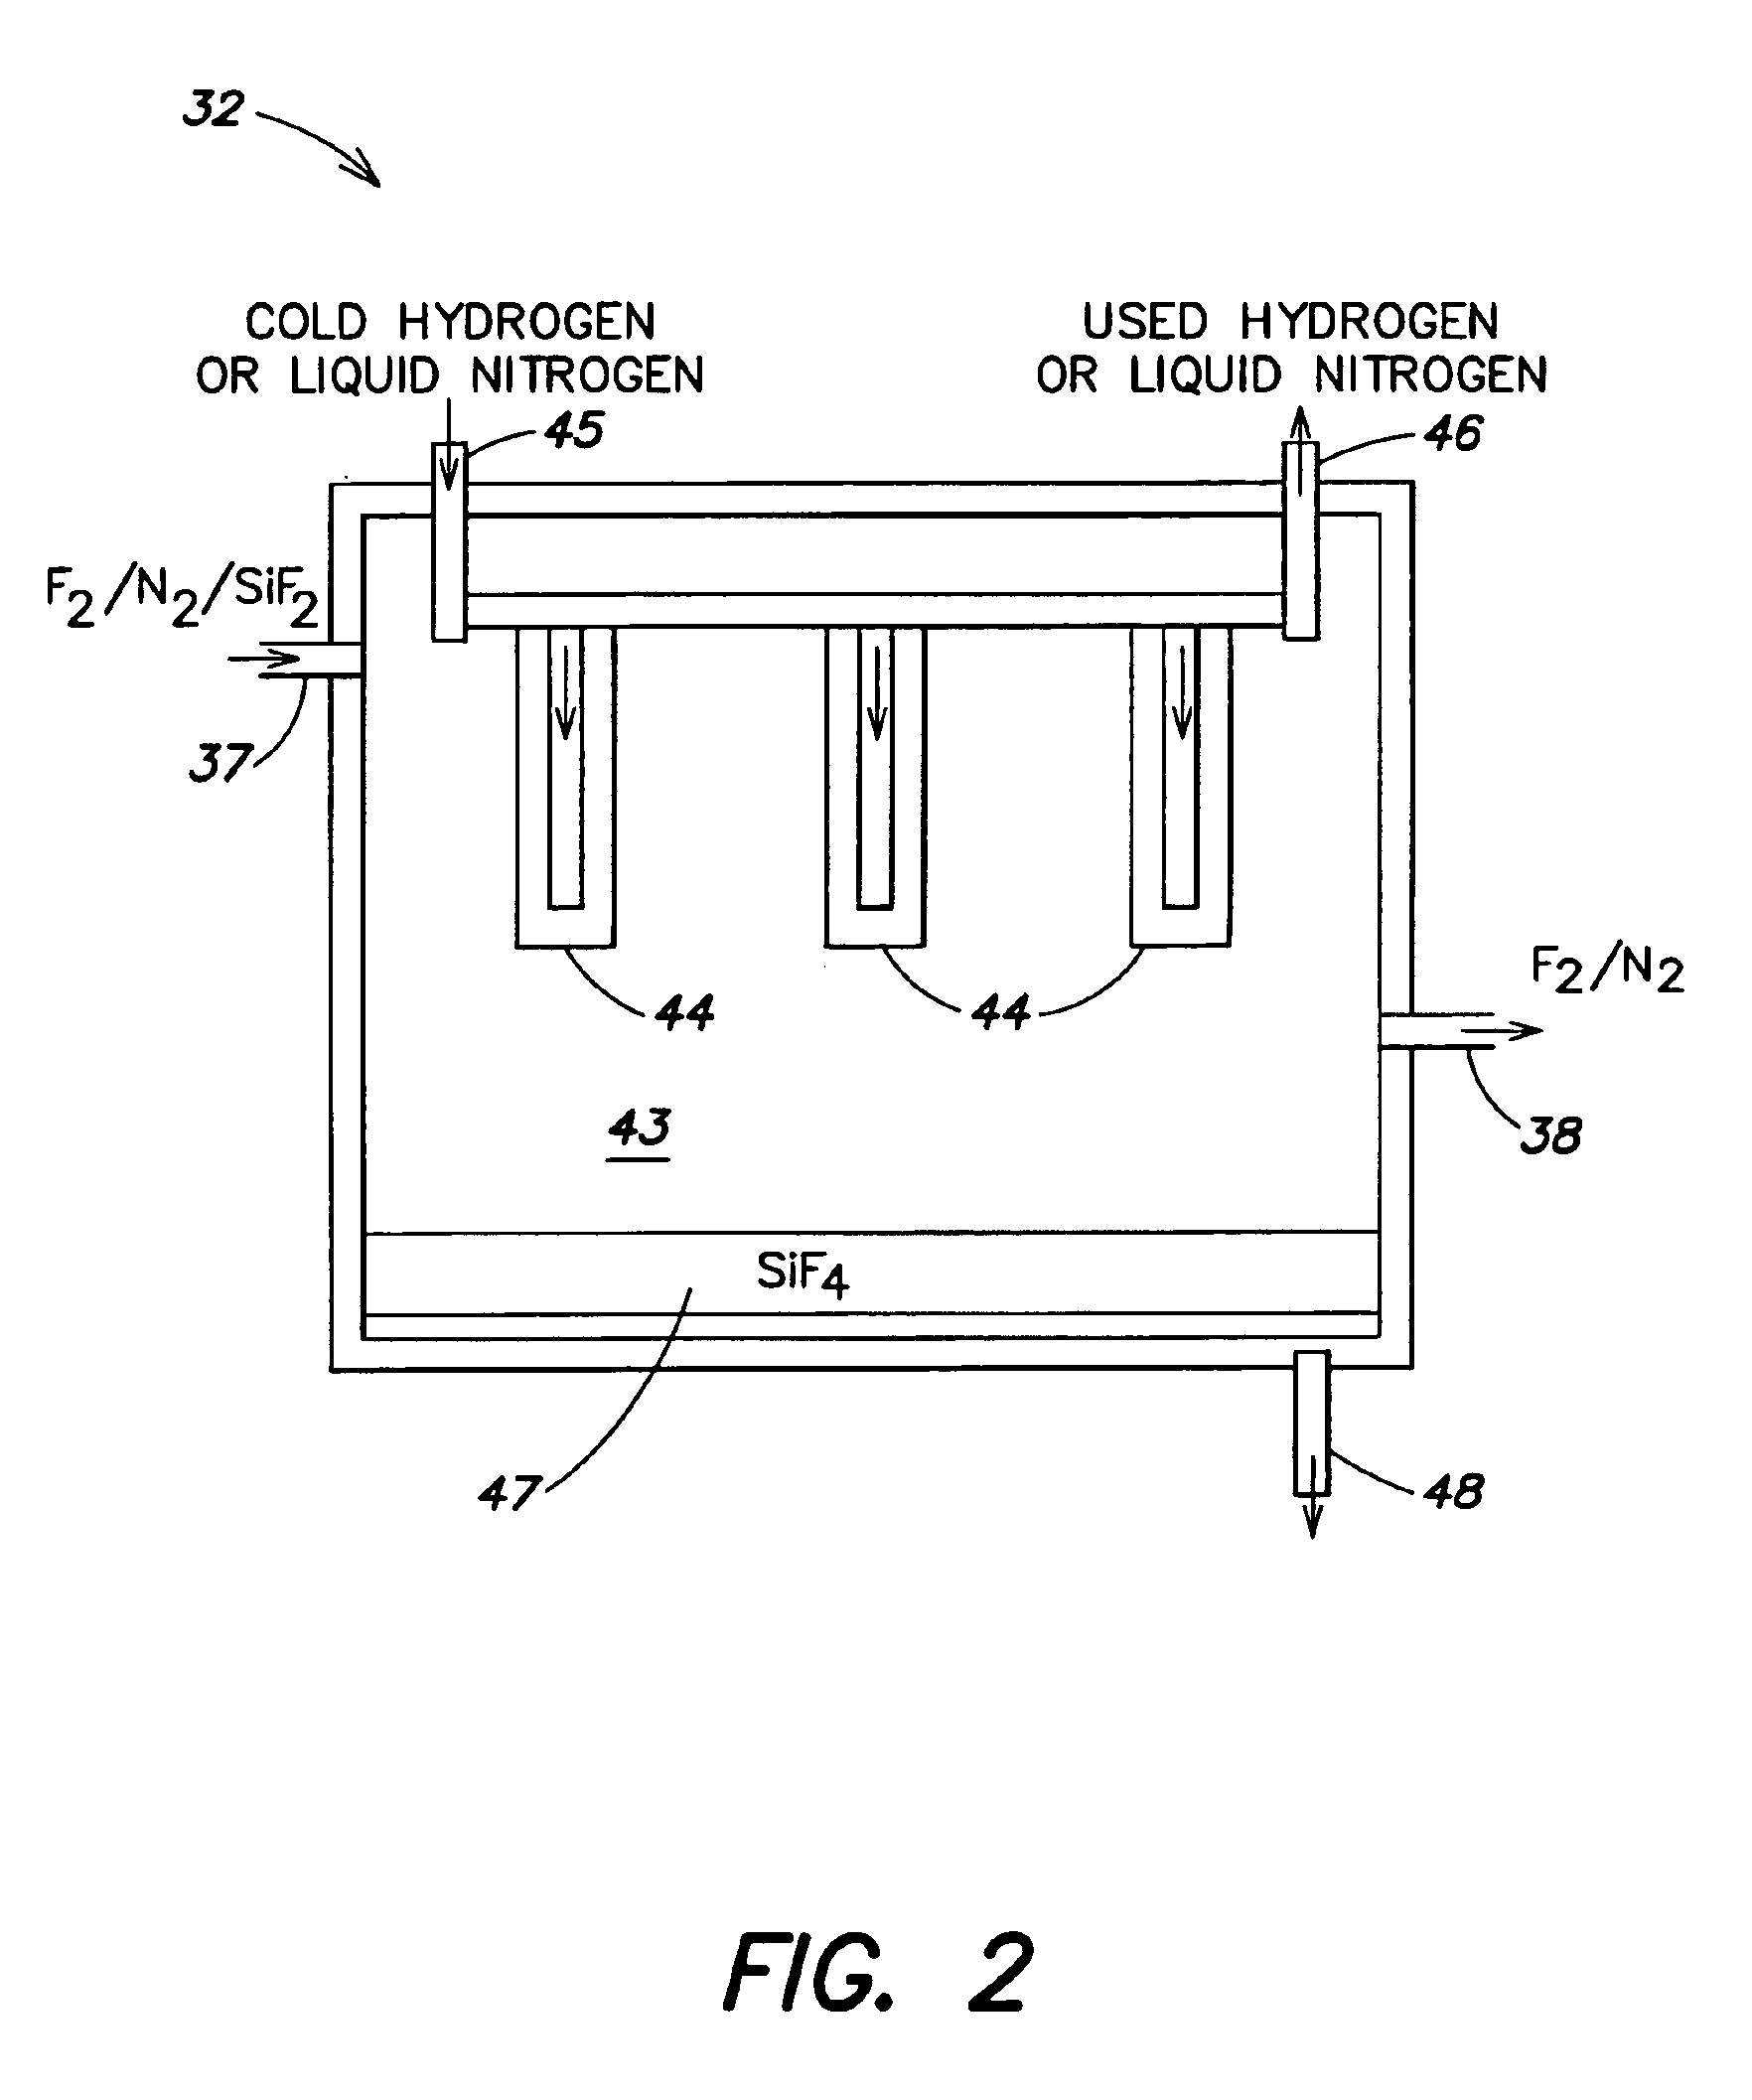 Semiconductor device fabrication chamber cleaning method and apparatus with recirculation of cleaning gas